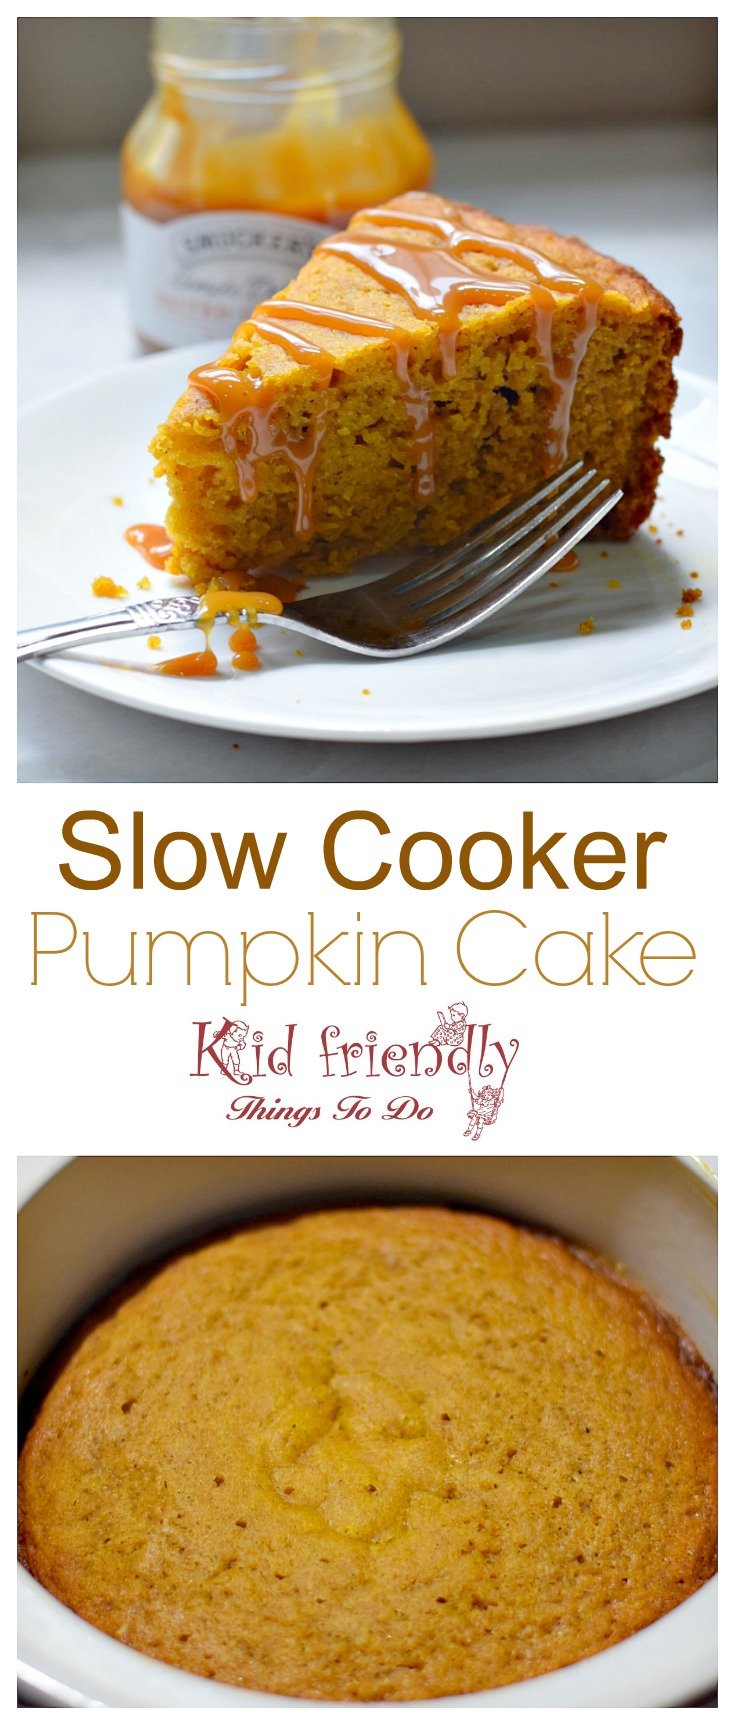 Moist and Delicious Slow Cooker Pumpkin Cake Recipe - Perfect for fall or anytime! Easy to make in the Crock-pot - www.kidfriendlythingstodo.com